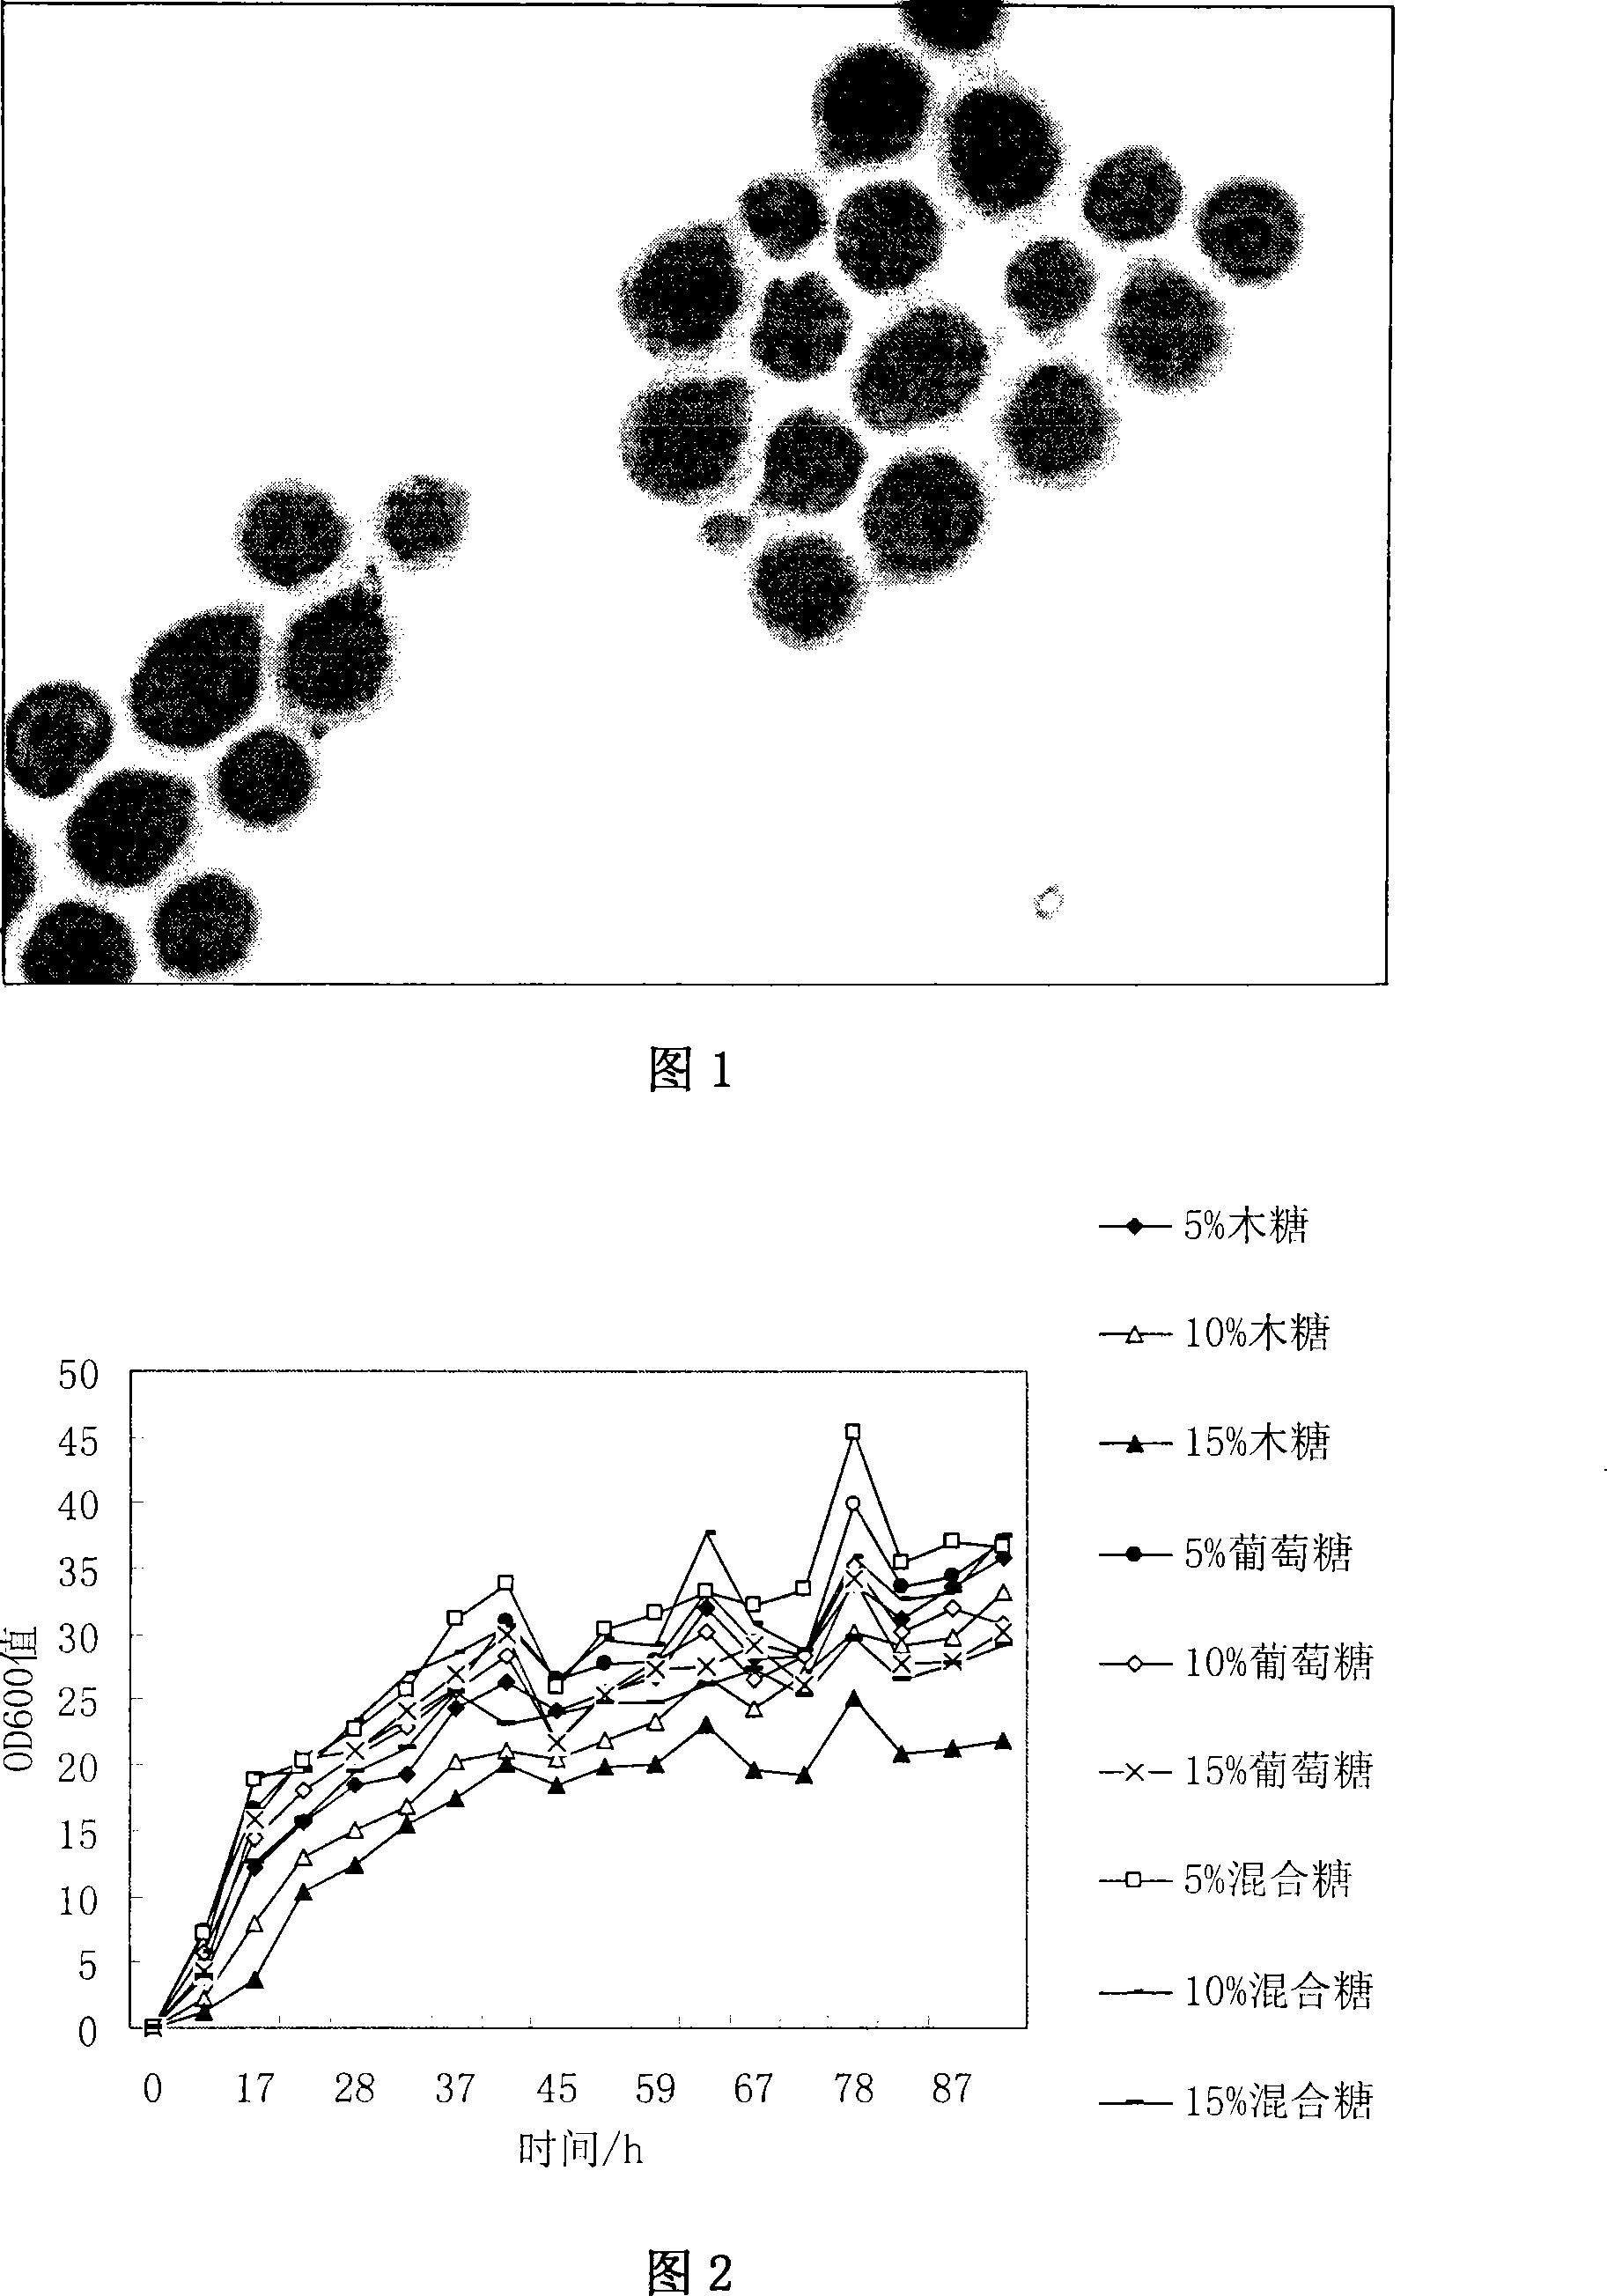 Recombinant saccharomyces cerevisiae for producing ethanol by using xylose and glucose